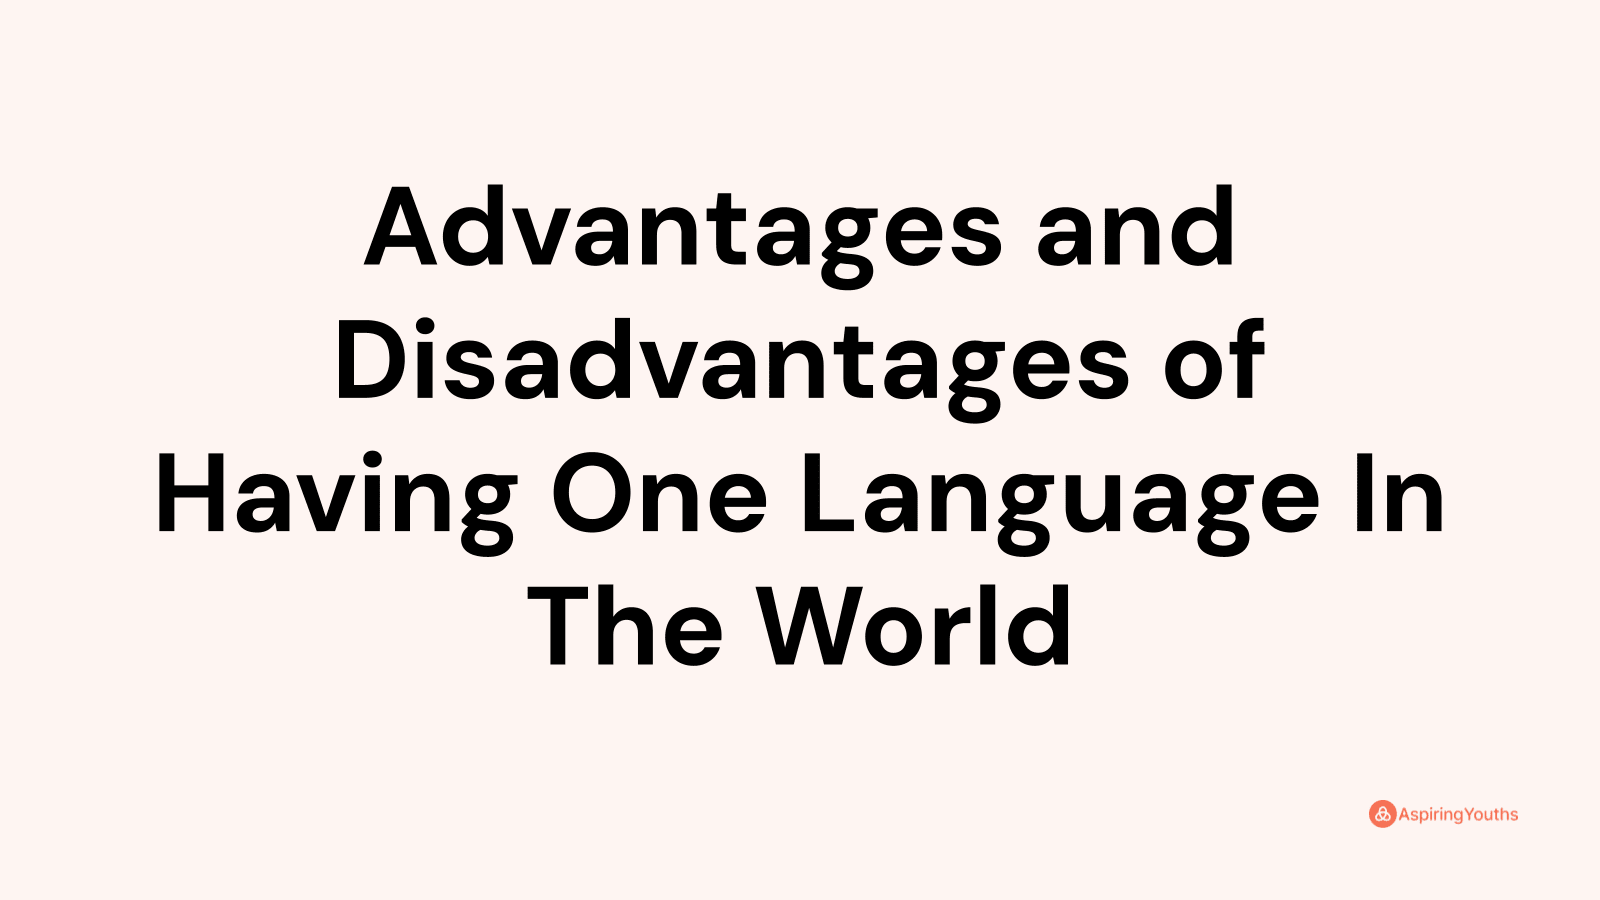 Advantages and disadvantages of Having One Language In The World